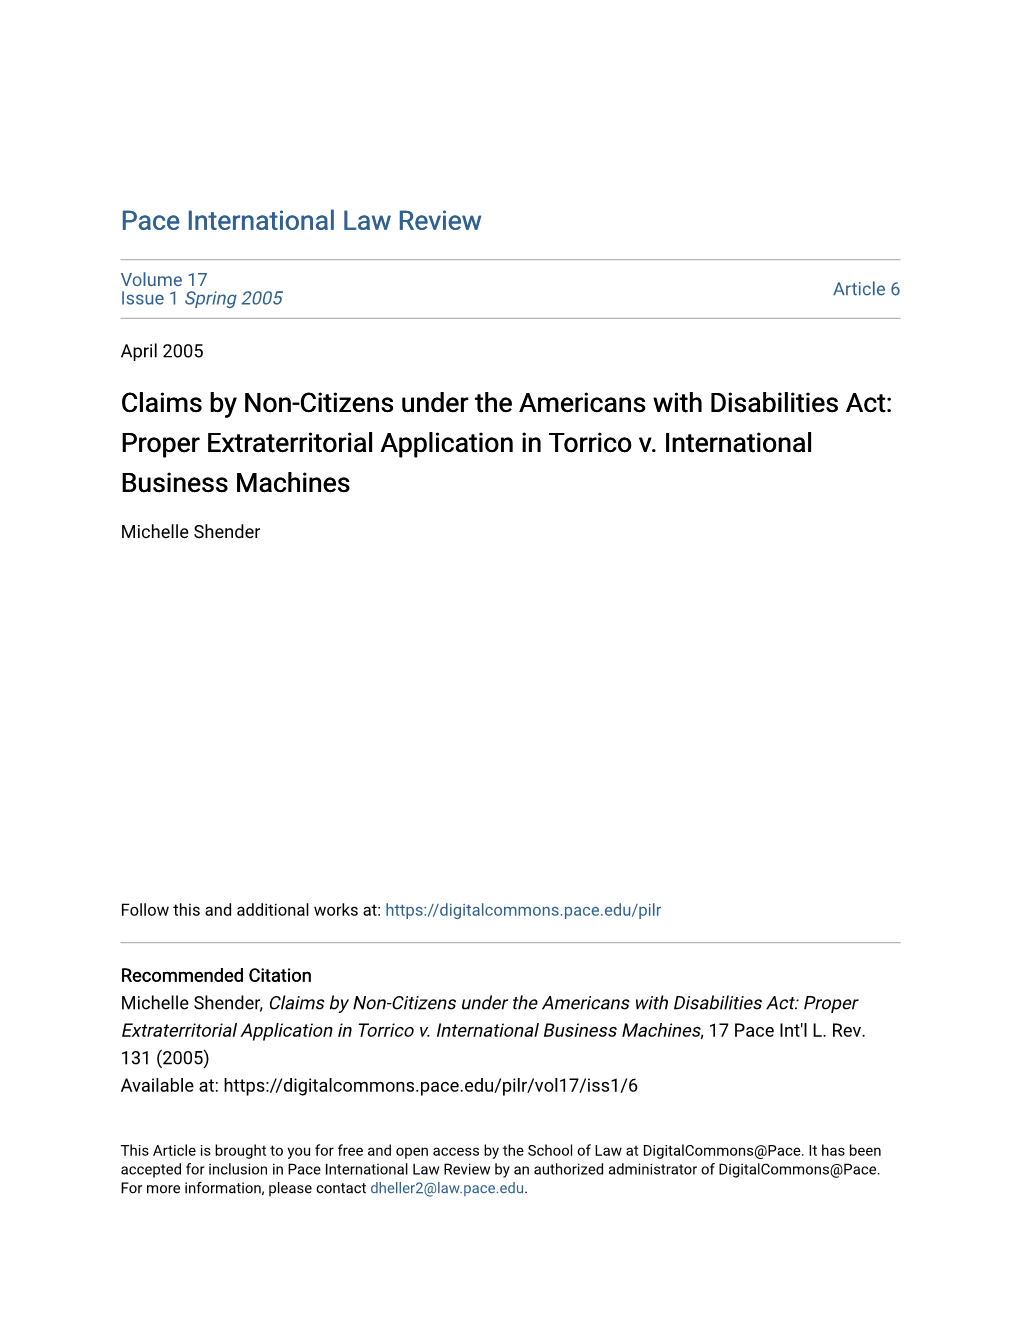 Claims by Non-Citizens Under the Americans with Disabilities Act: Proper Extraterritorial Application in Torrico V